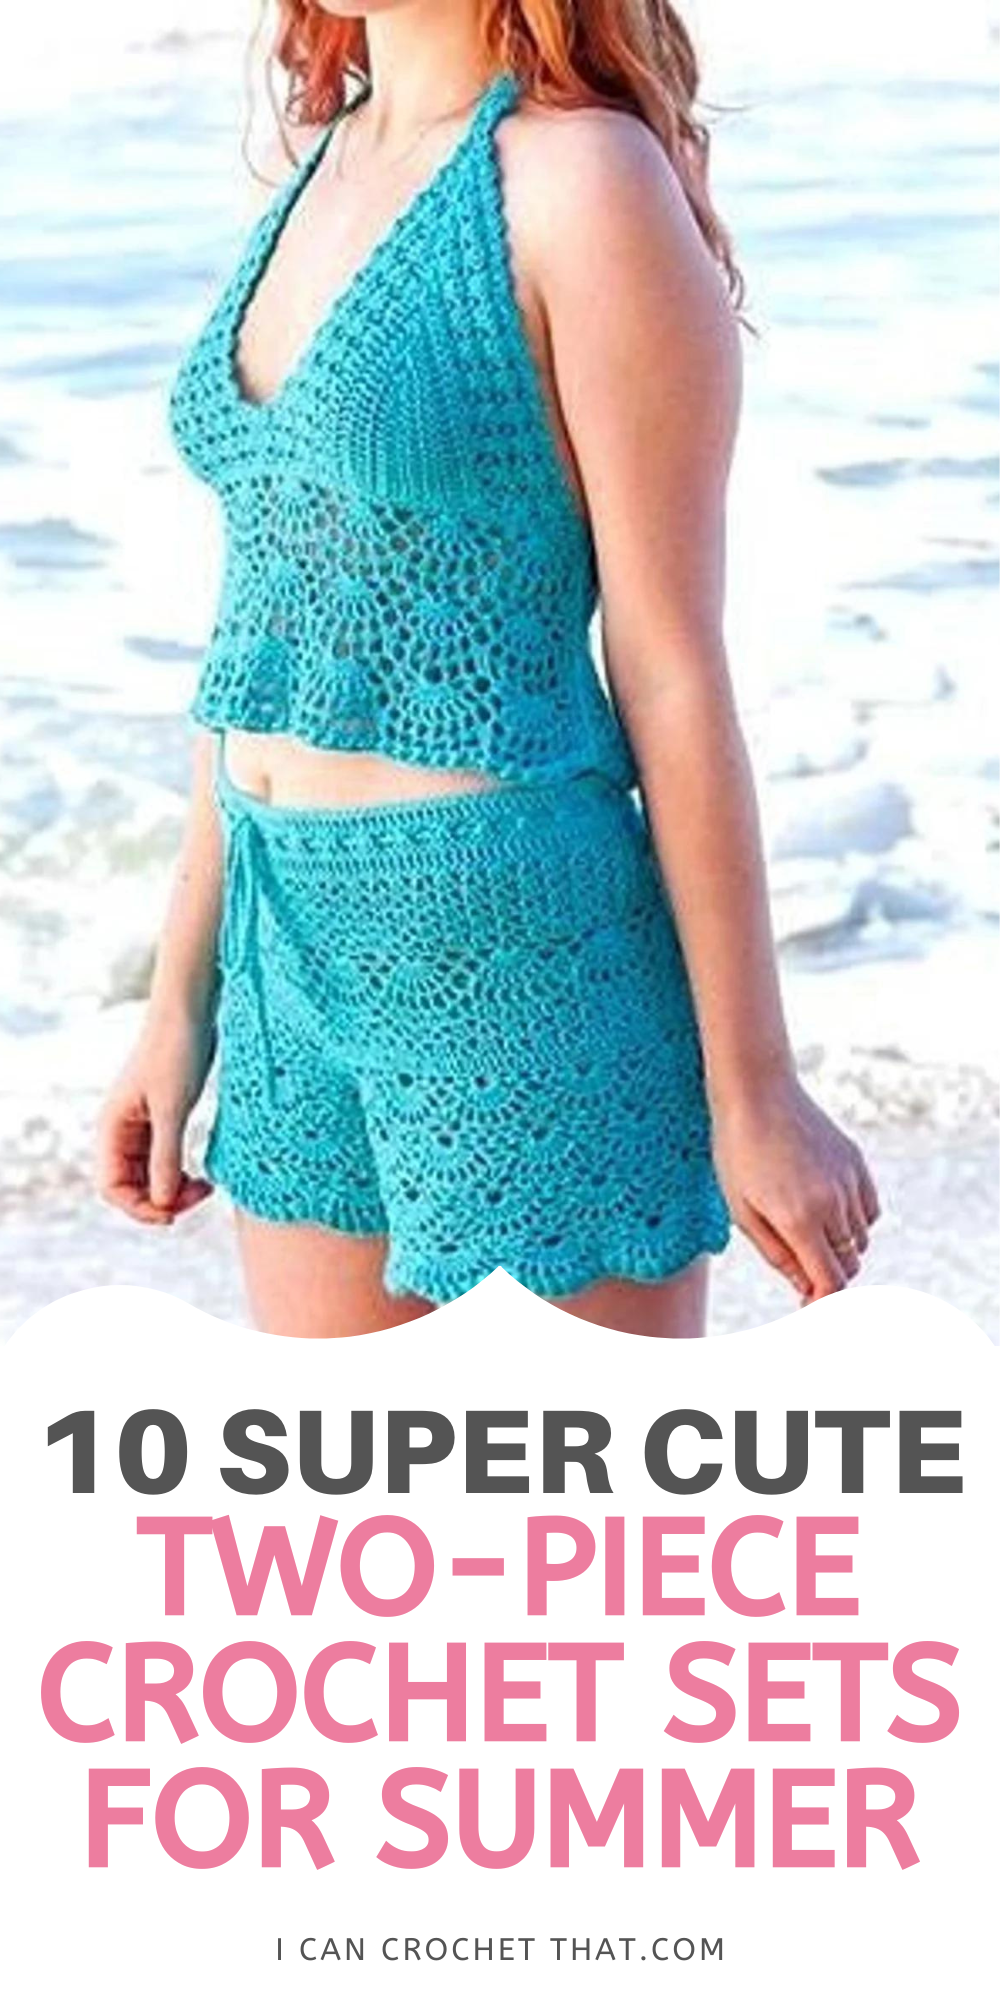 Crocheting outfit Free Stock Photos, Images, and Pictures of Crocheting  outfit